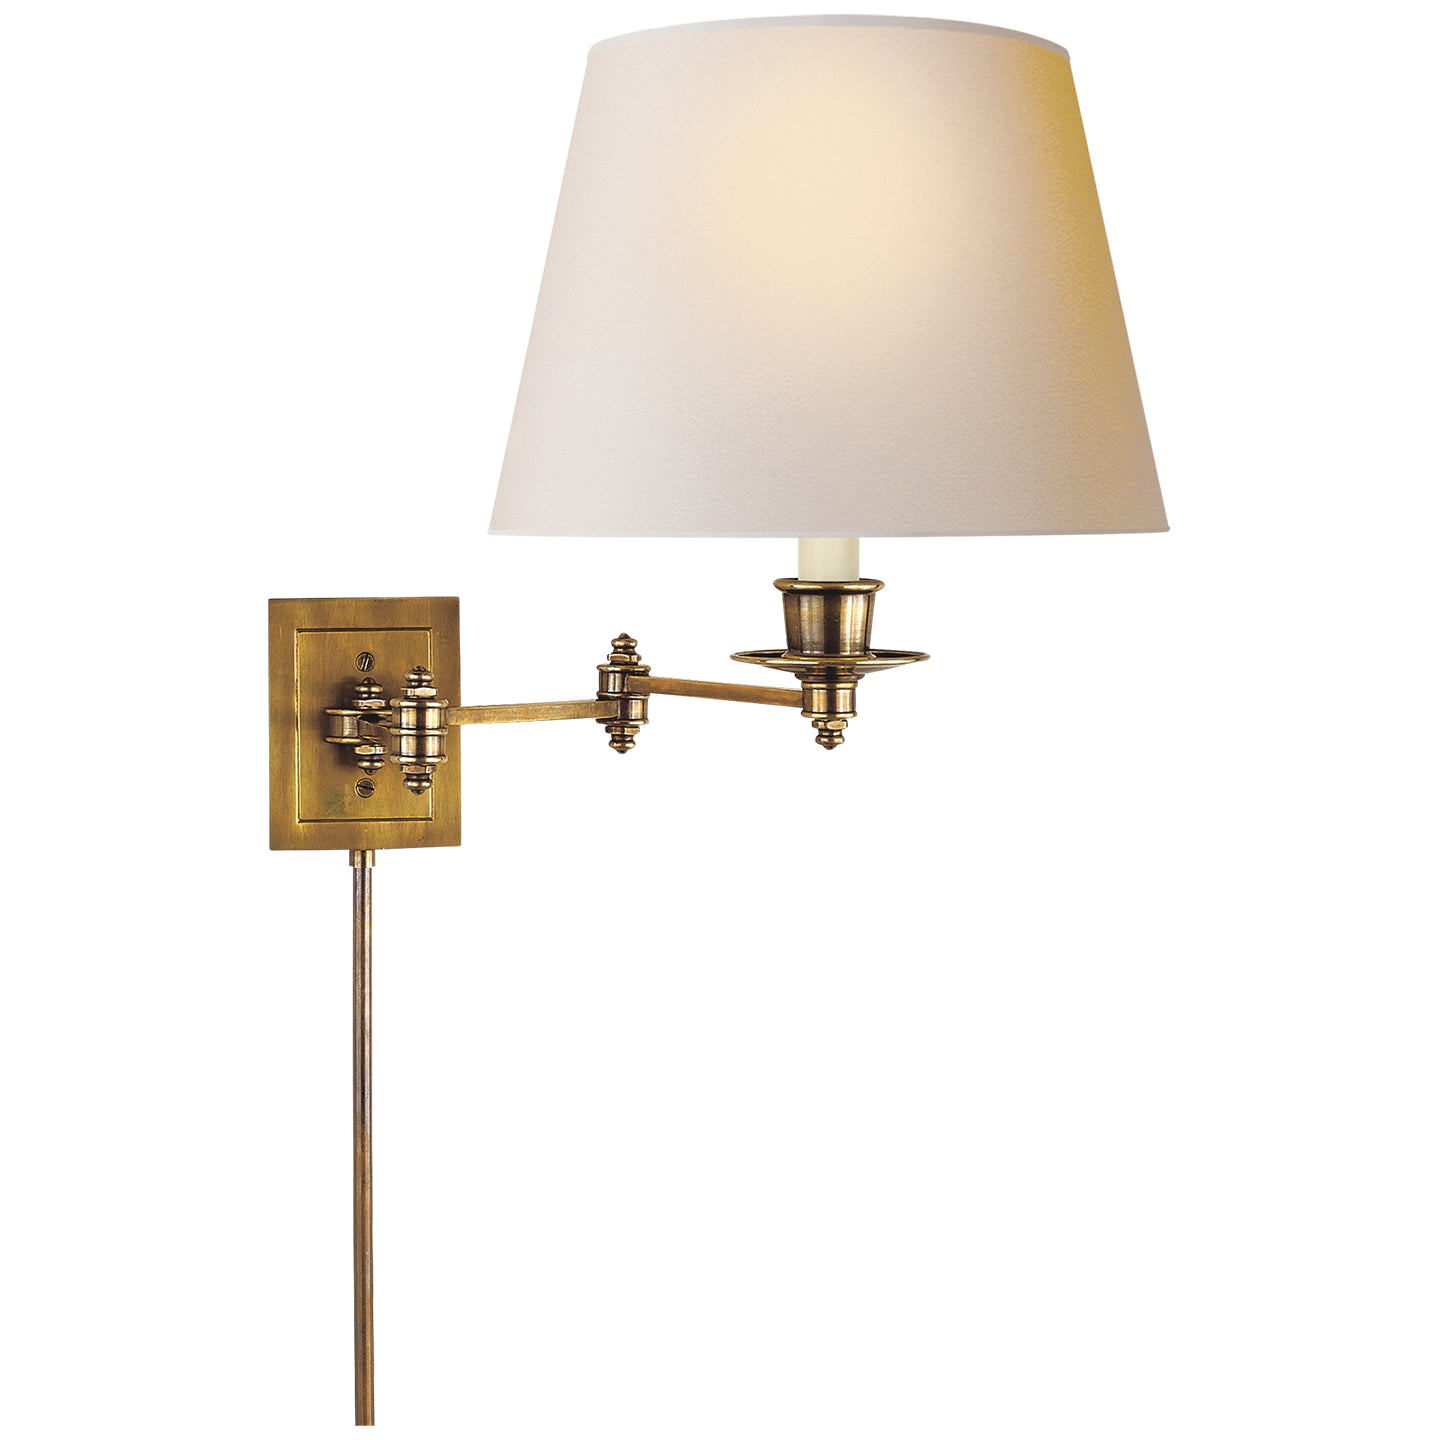 Visual Comfort Signature - S 2000HAB-NP - One Light Wall Sconce - Swing Arm Sconce - Hand-Rubbed Antique Brass